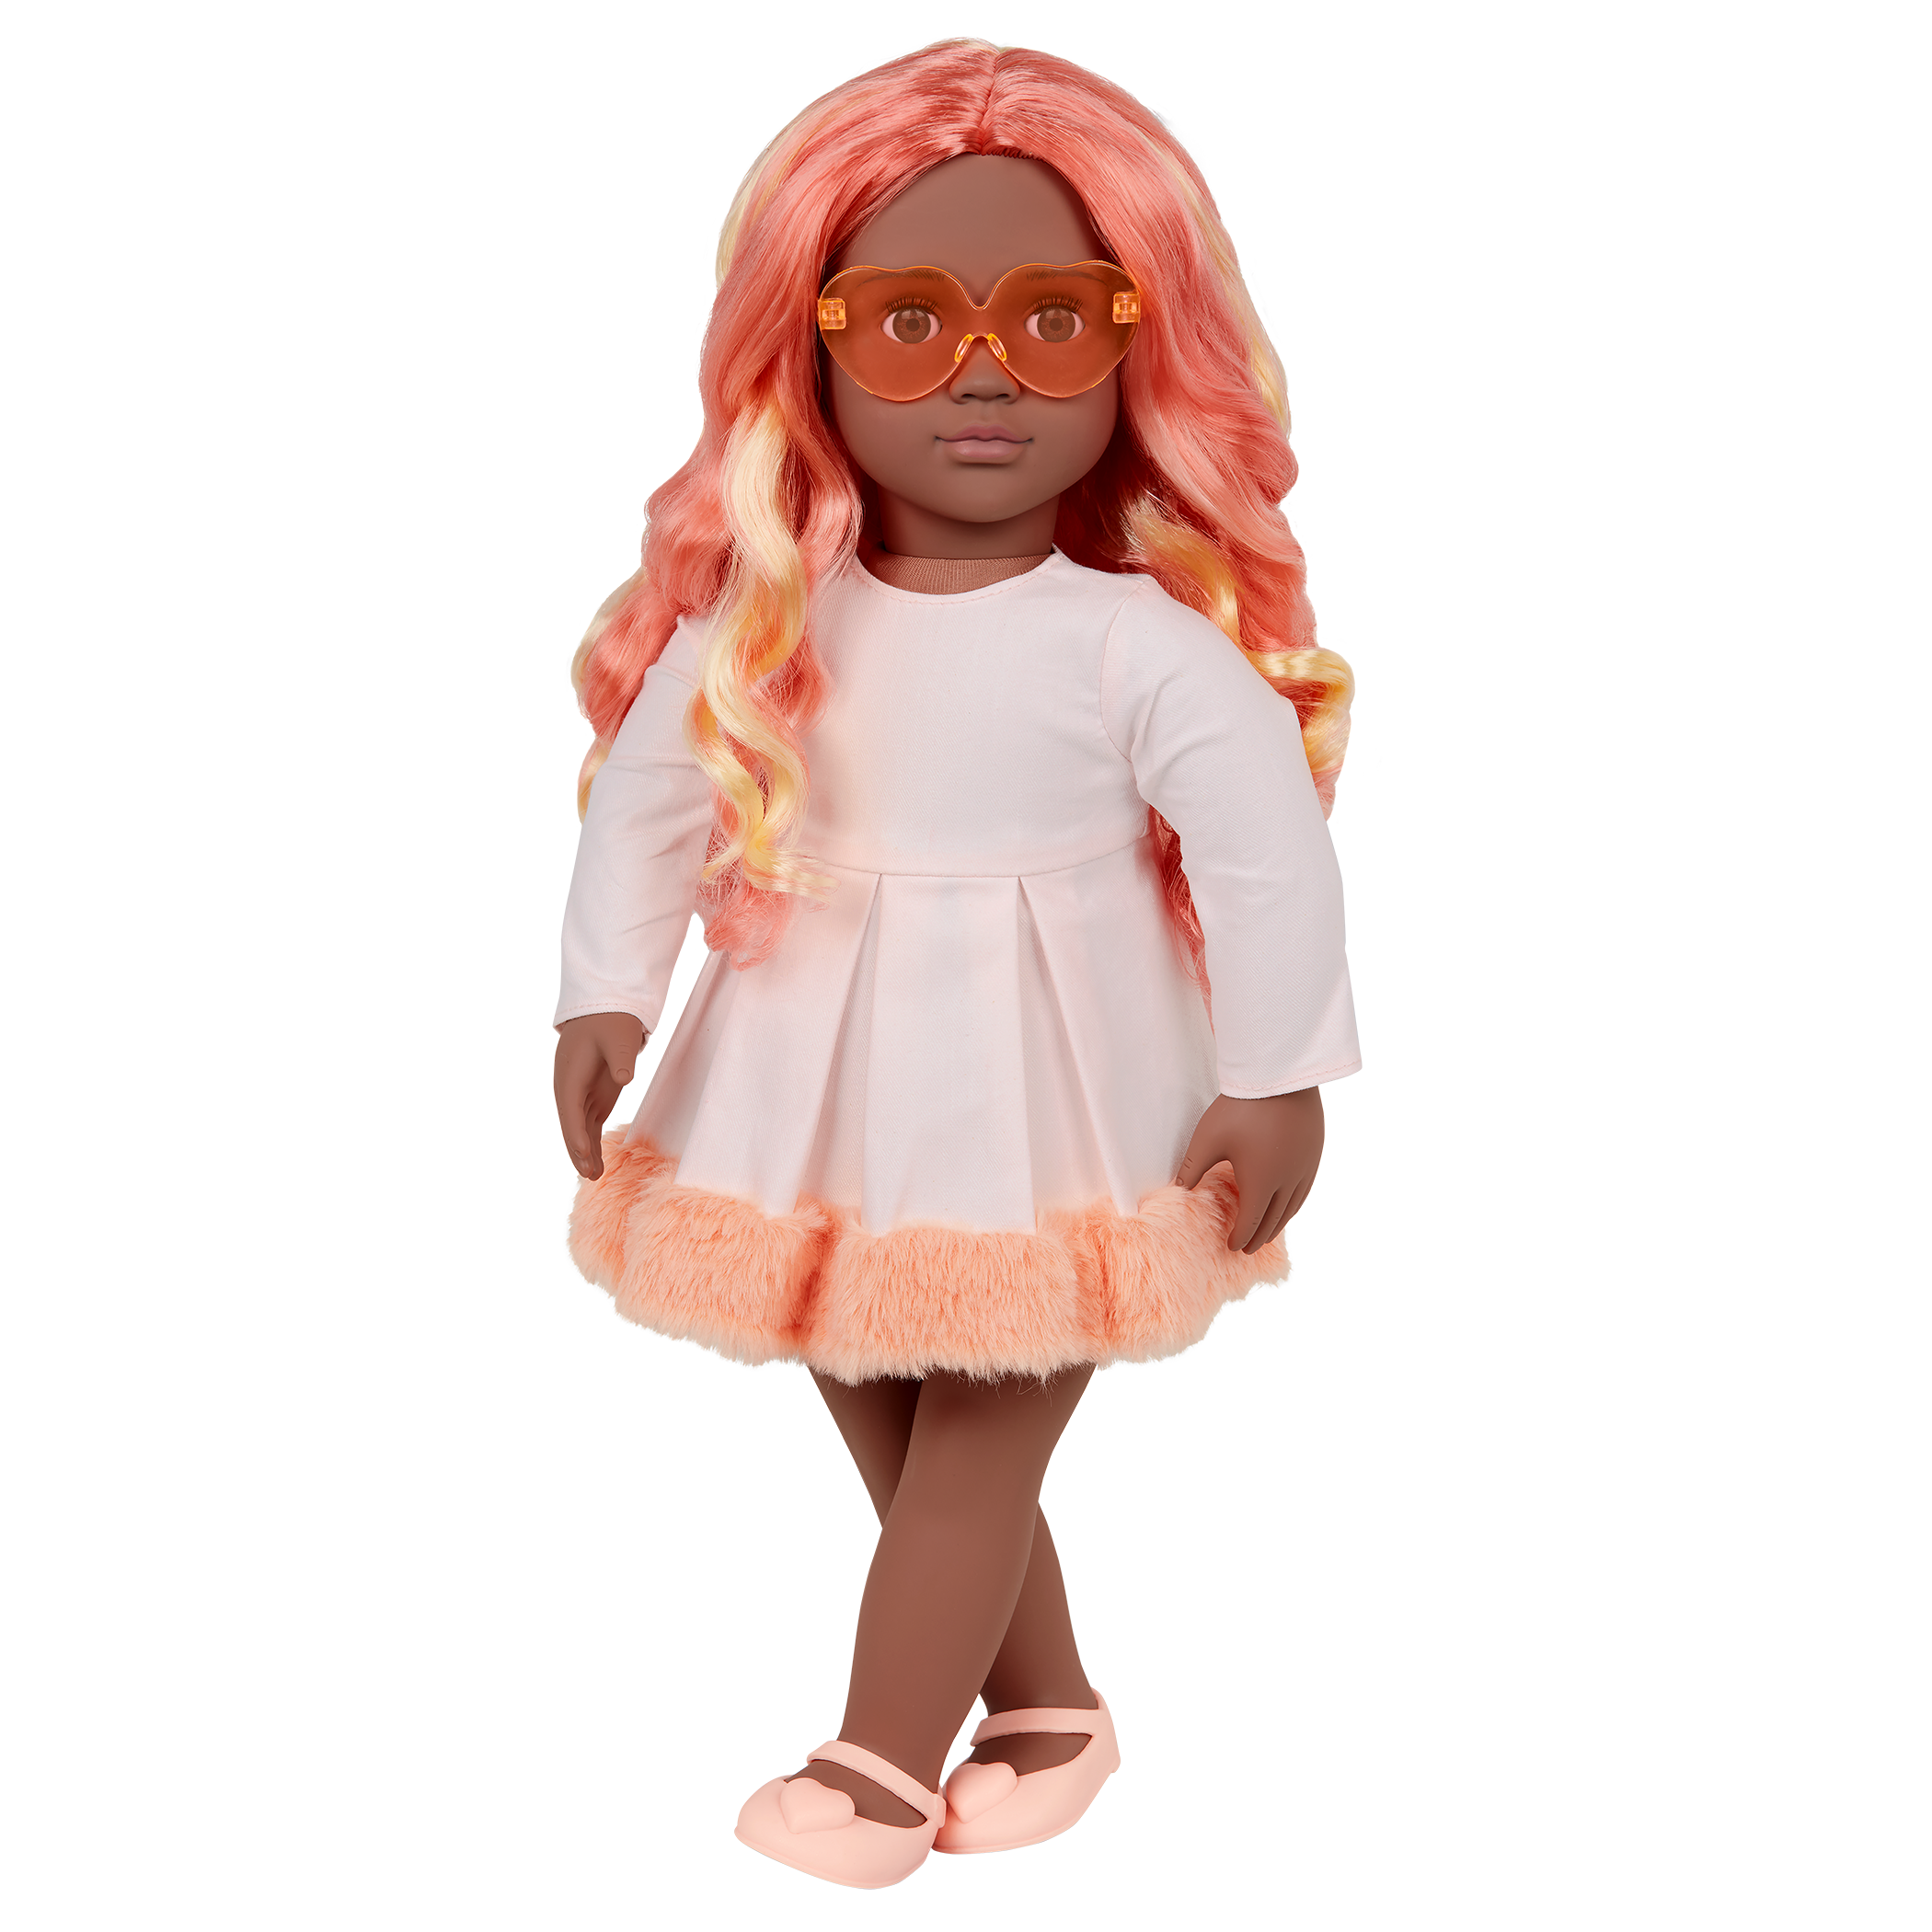 Our Generation 18-inch Multicolored Hair Doll Mirabelle